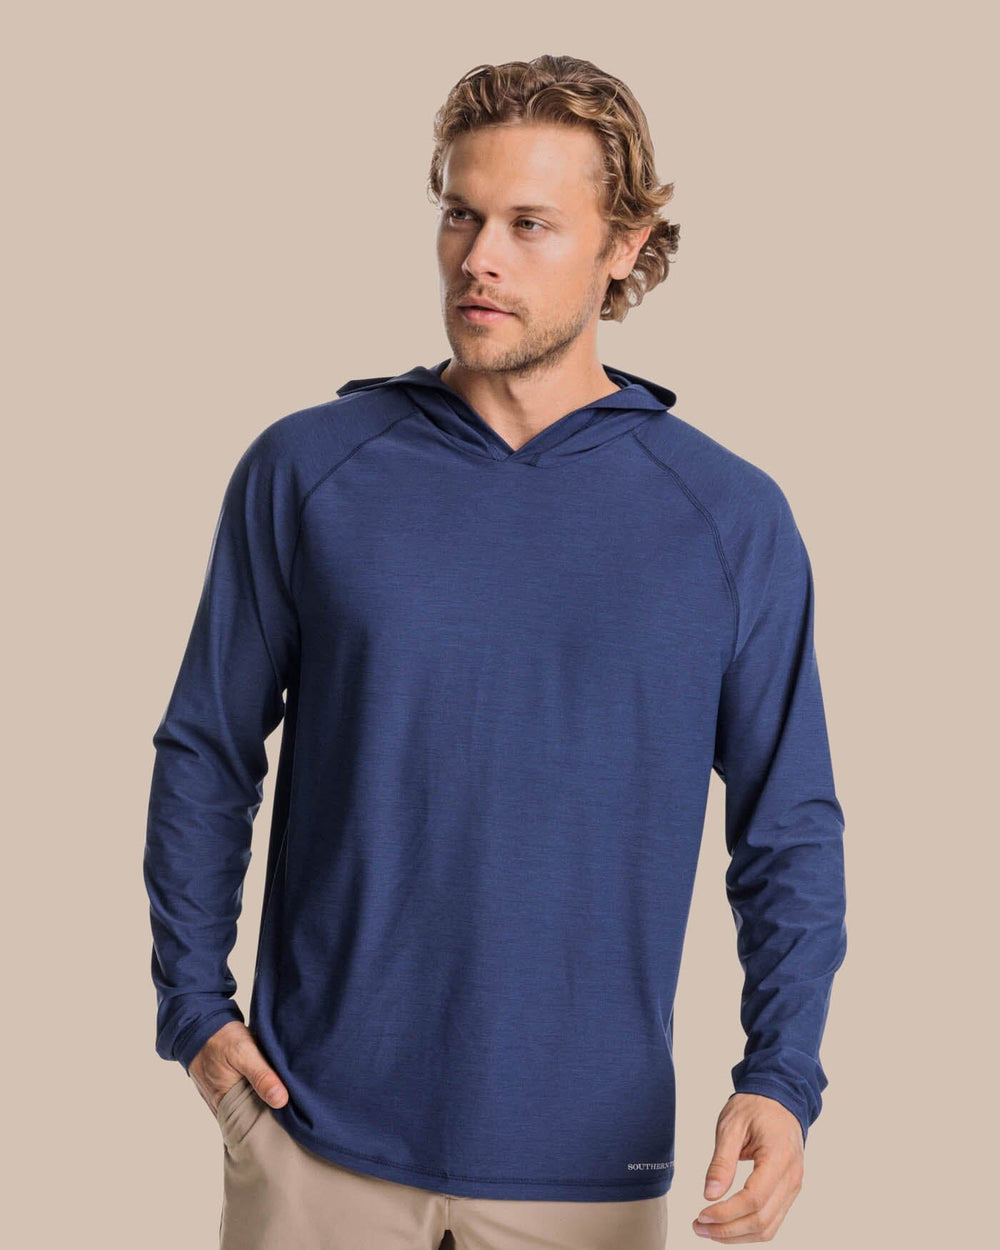 The front view of the Southern Tide brrr°®-illiant Performance Hoodie by Southern Tide - Nautical Navy